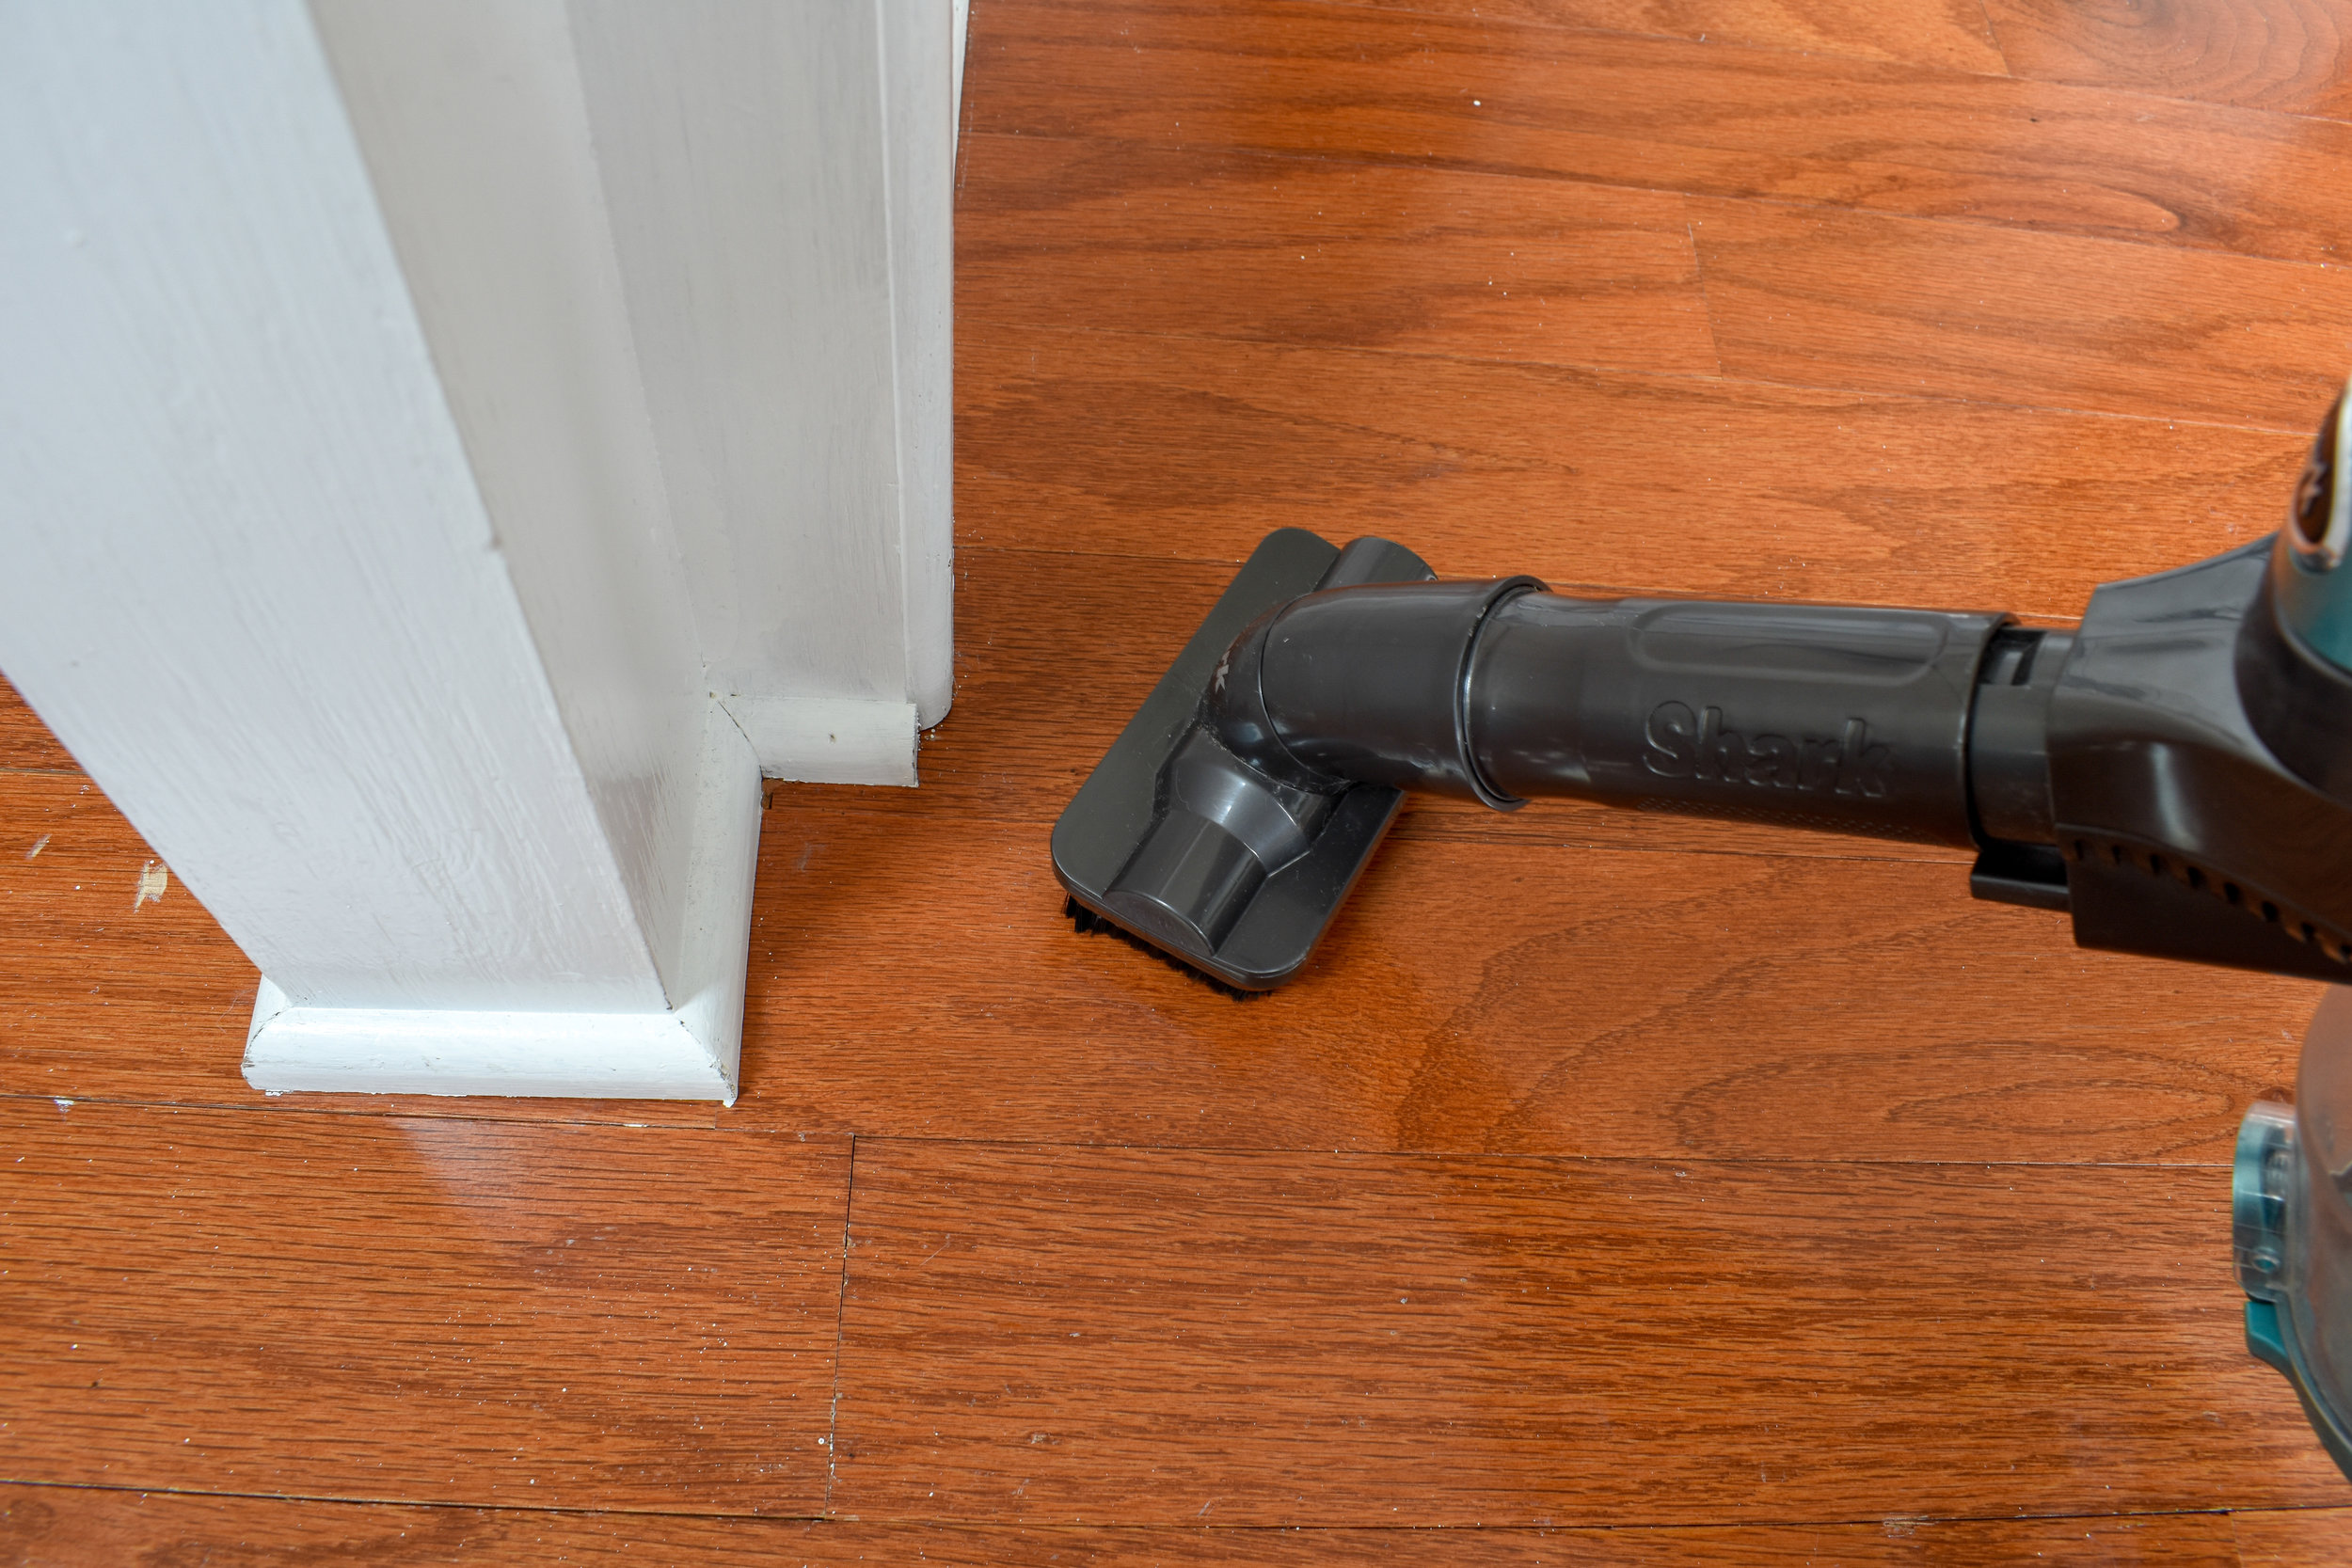 How To Make Old Hardwood Floors Shine, How Do You Clean Hardwood Floors Without Damaging Them